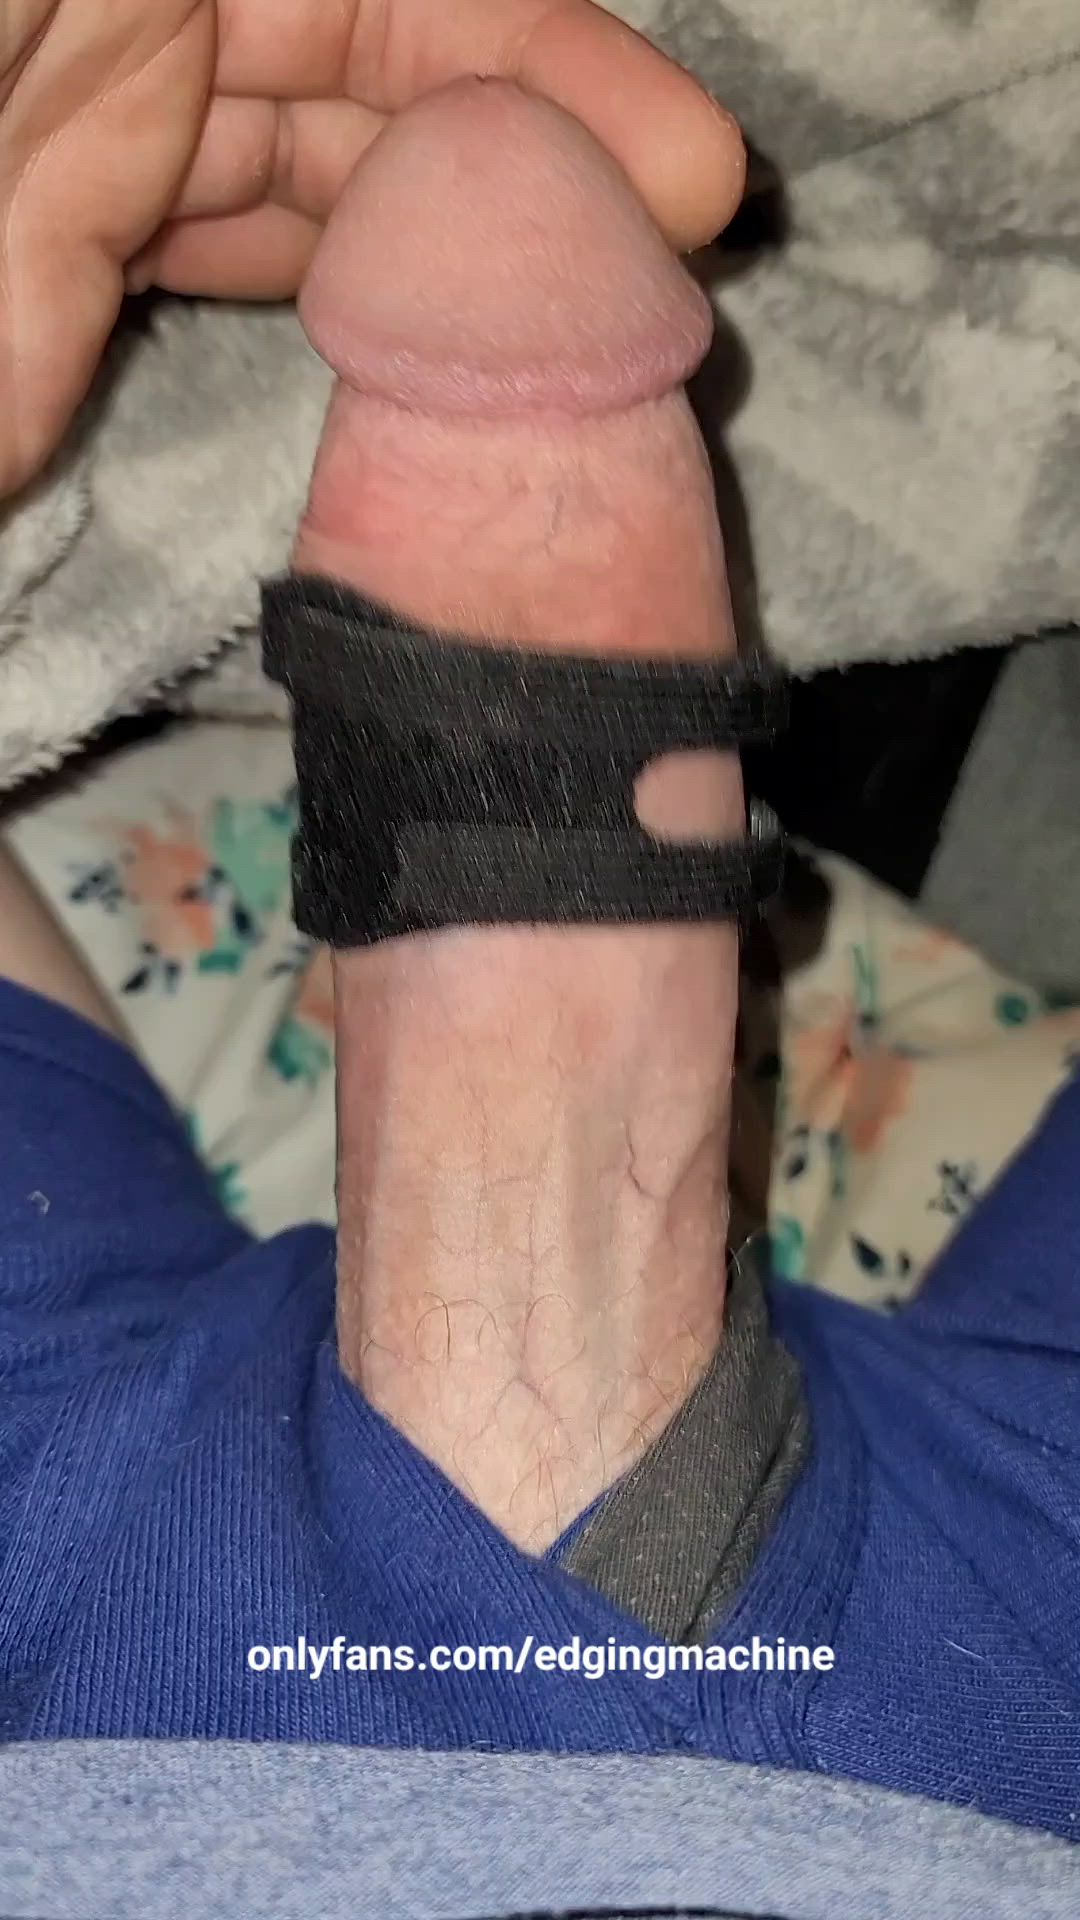 Big Dick porn video with onlyfans model duh6969 <strong>@edgingmachine</strong>